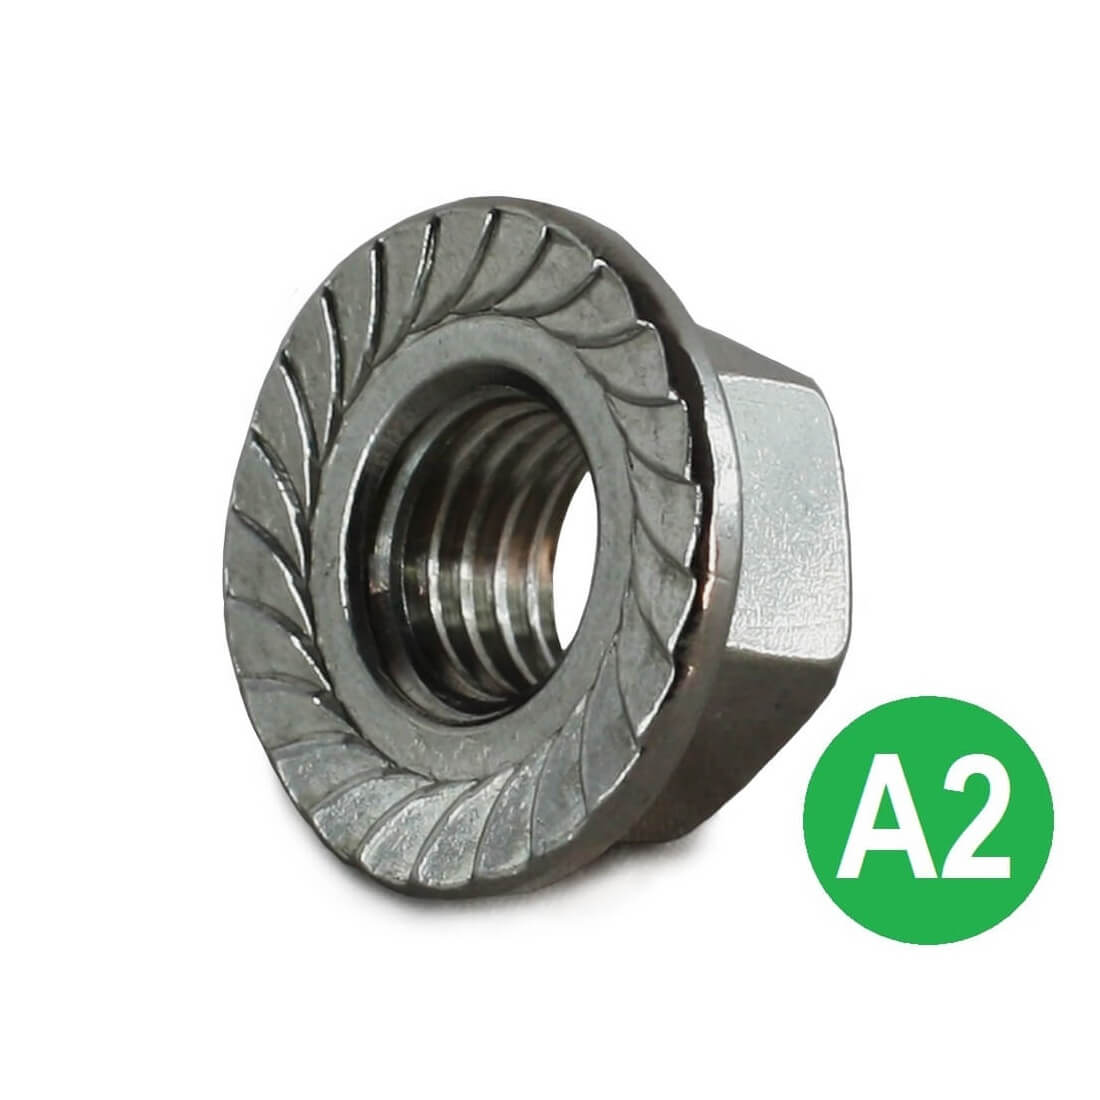 M3 A2 Serrated Flange Nut DIN 6923 / ISO 4161